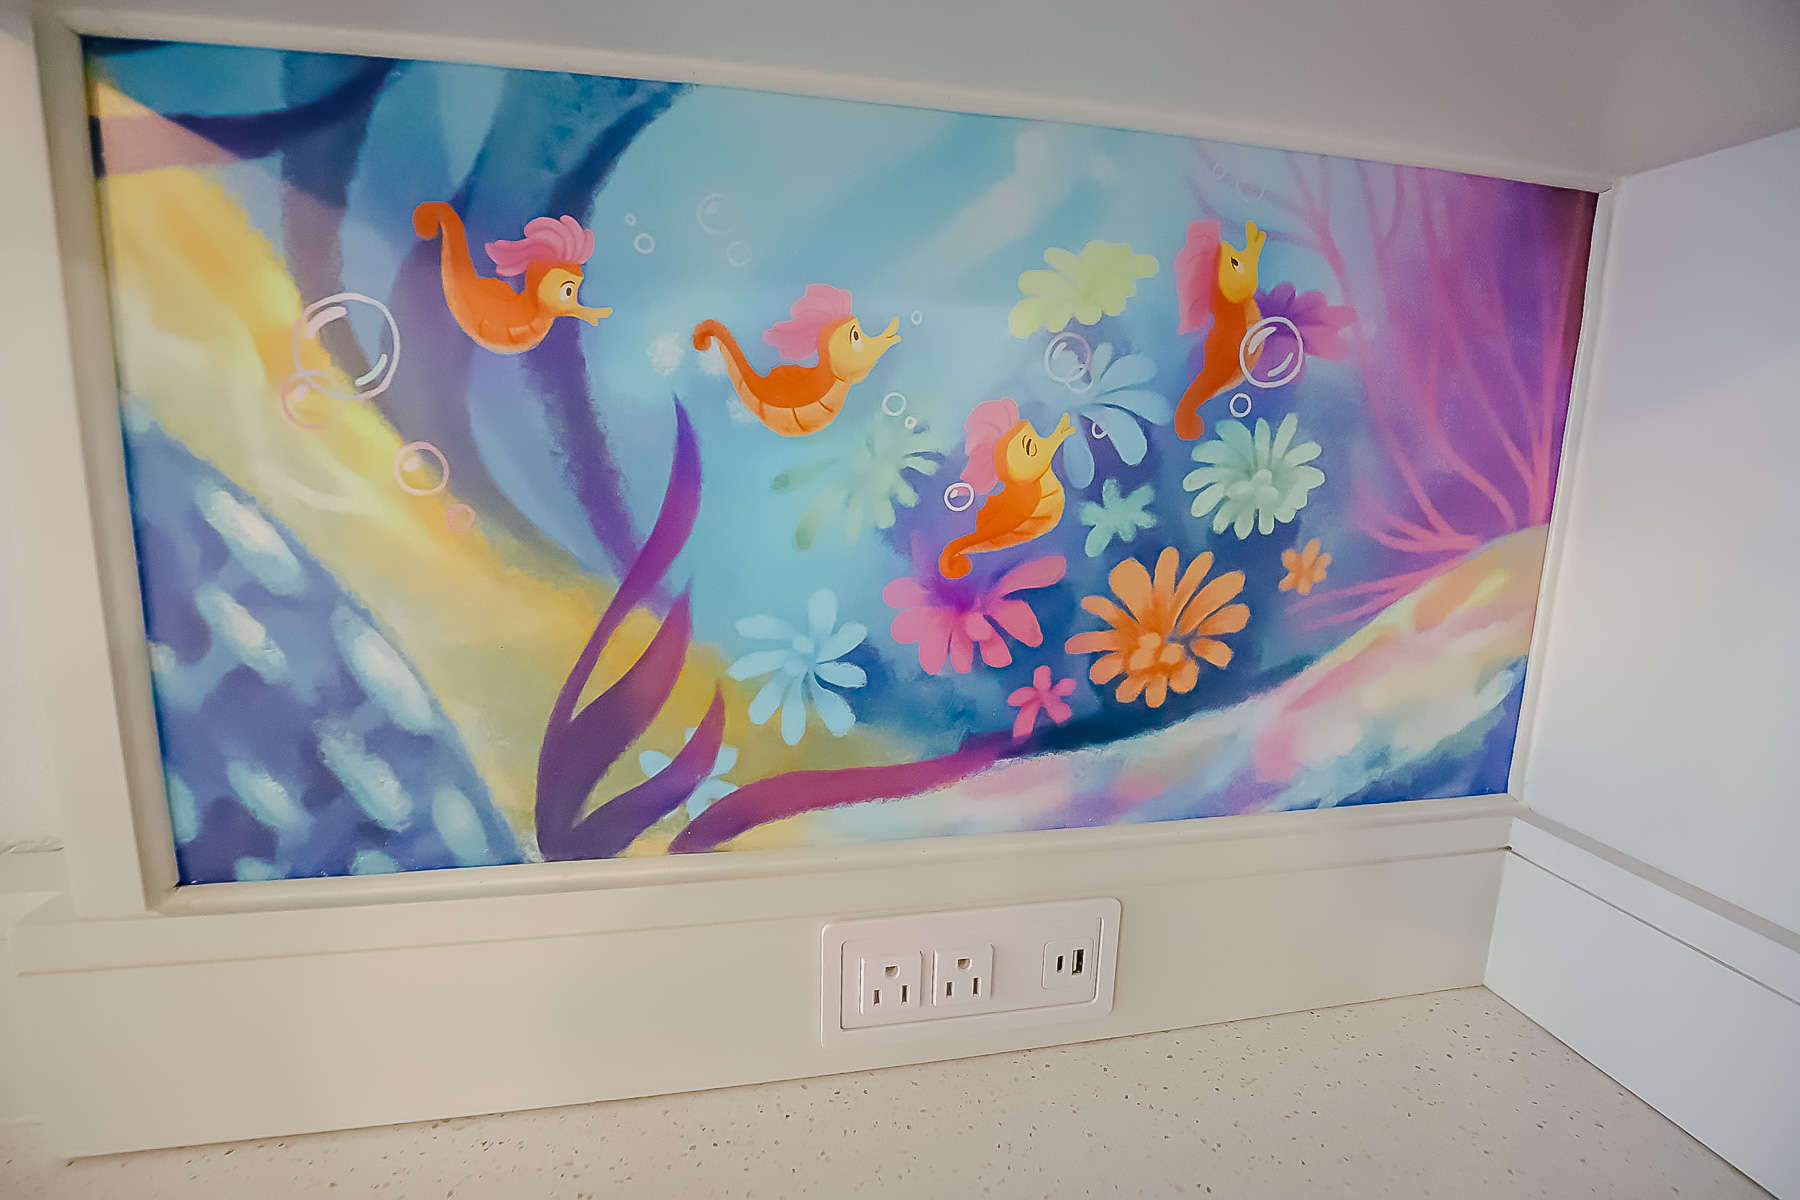 artwork featuring seahorses from 'The Little Mermaid'